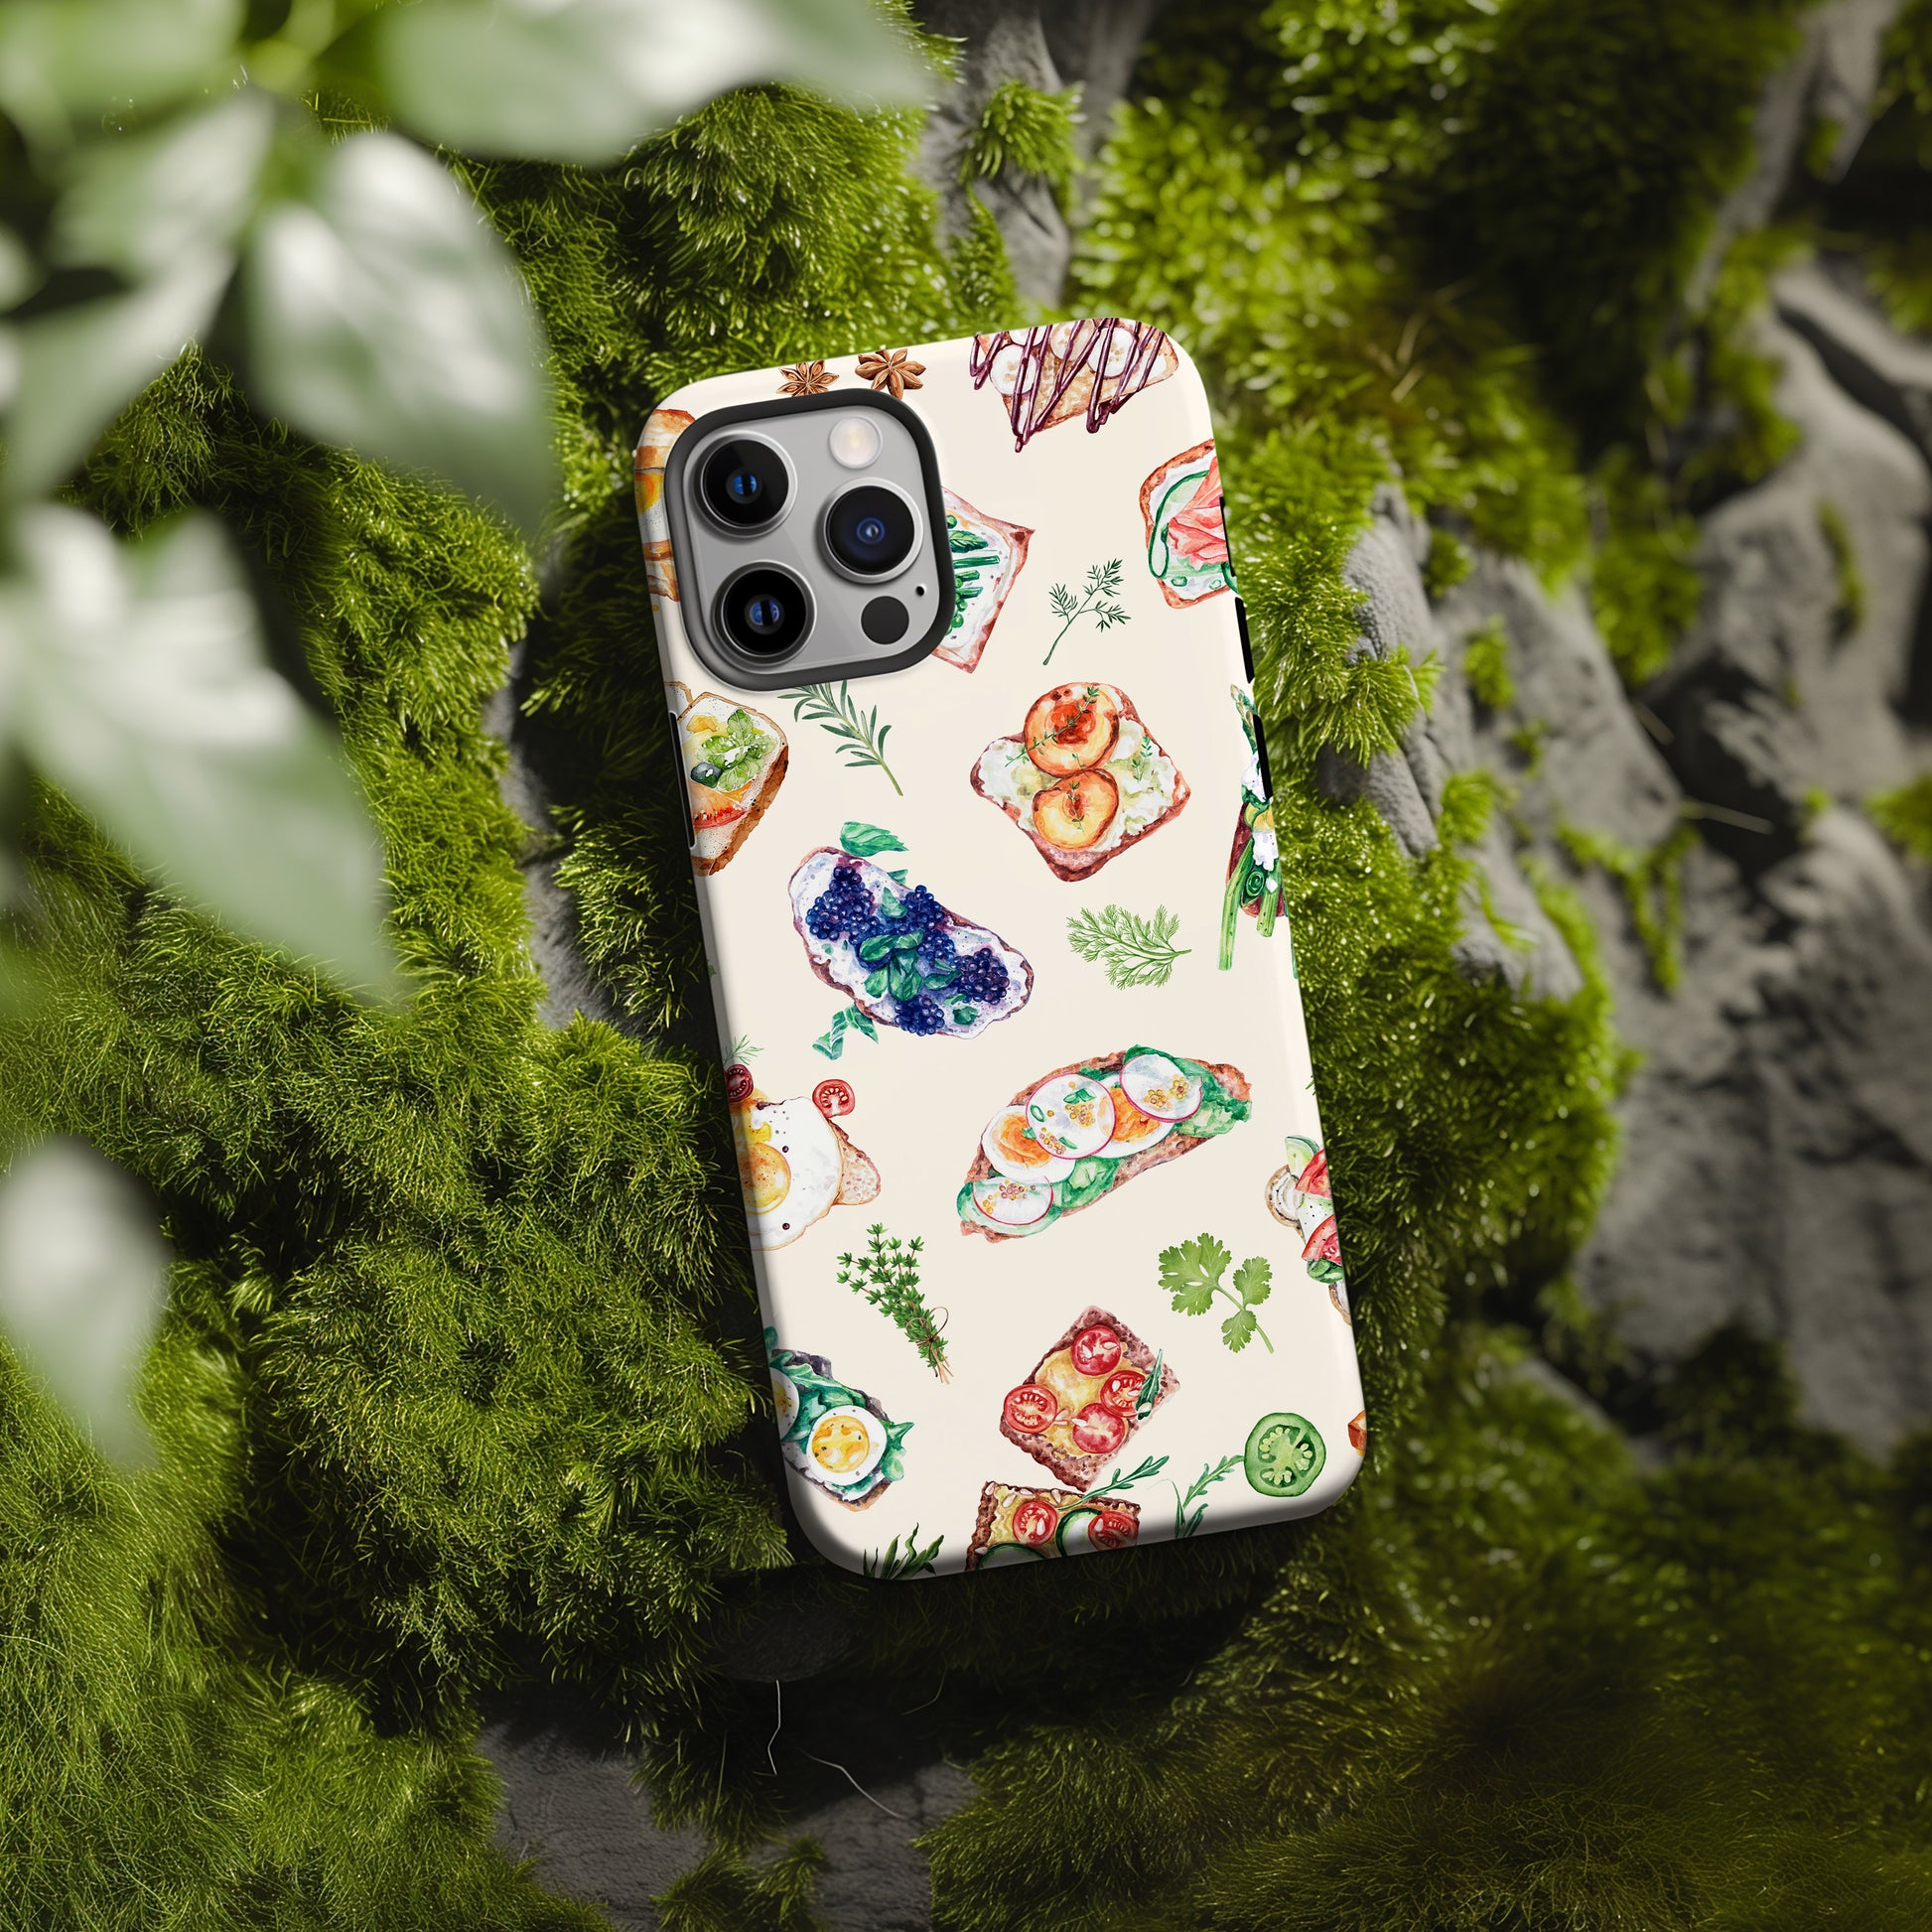 moss rock view of Sandwich Collage Phone Case is uniquely designed with delicate watercolor collage art. Available for both iPhone and Samsung Galaxy, this case artfully combines elements of open faced sandwiches with delicate herbs. Great foodie or chef gift by Artscape Market